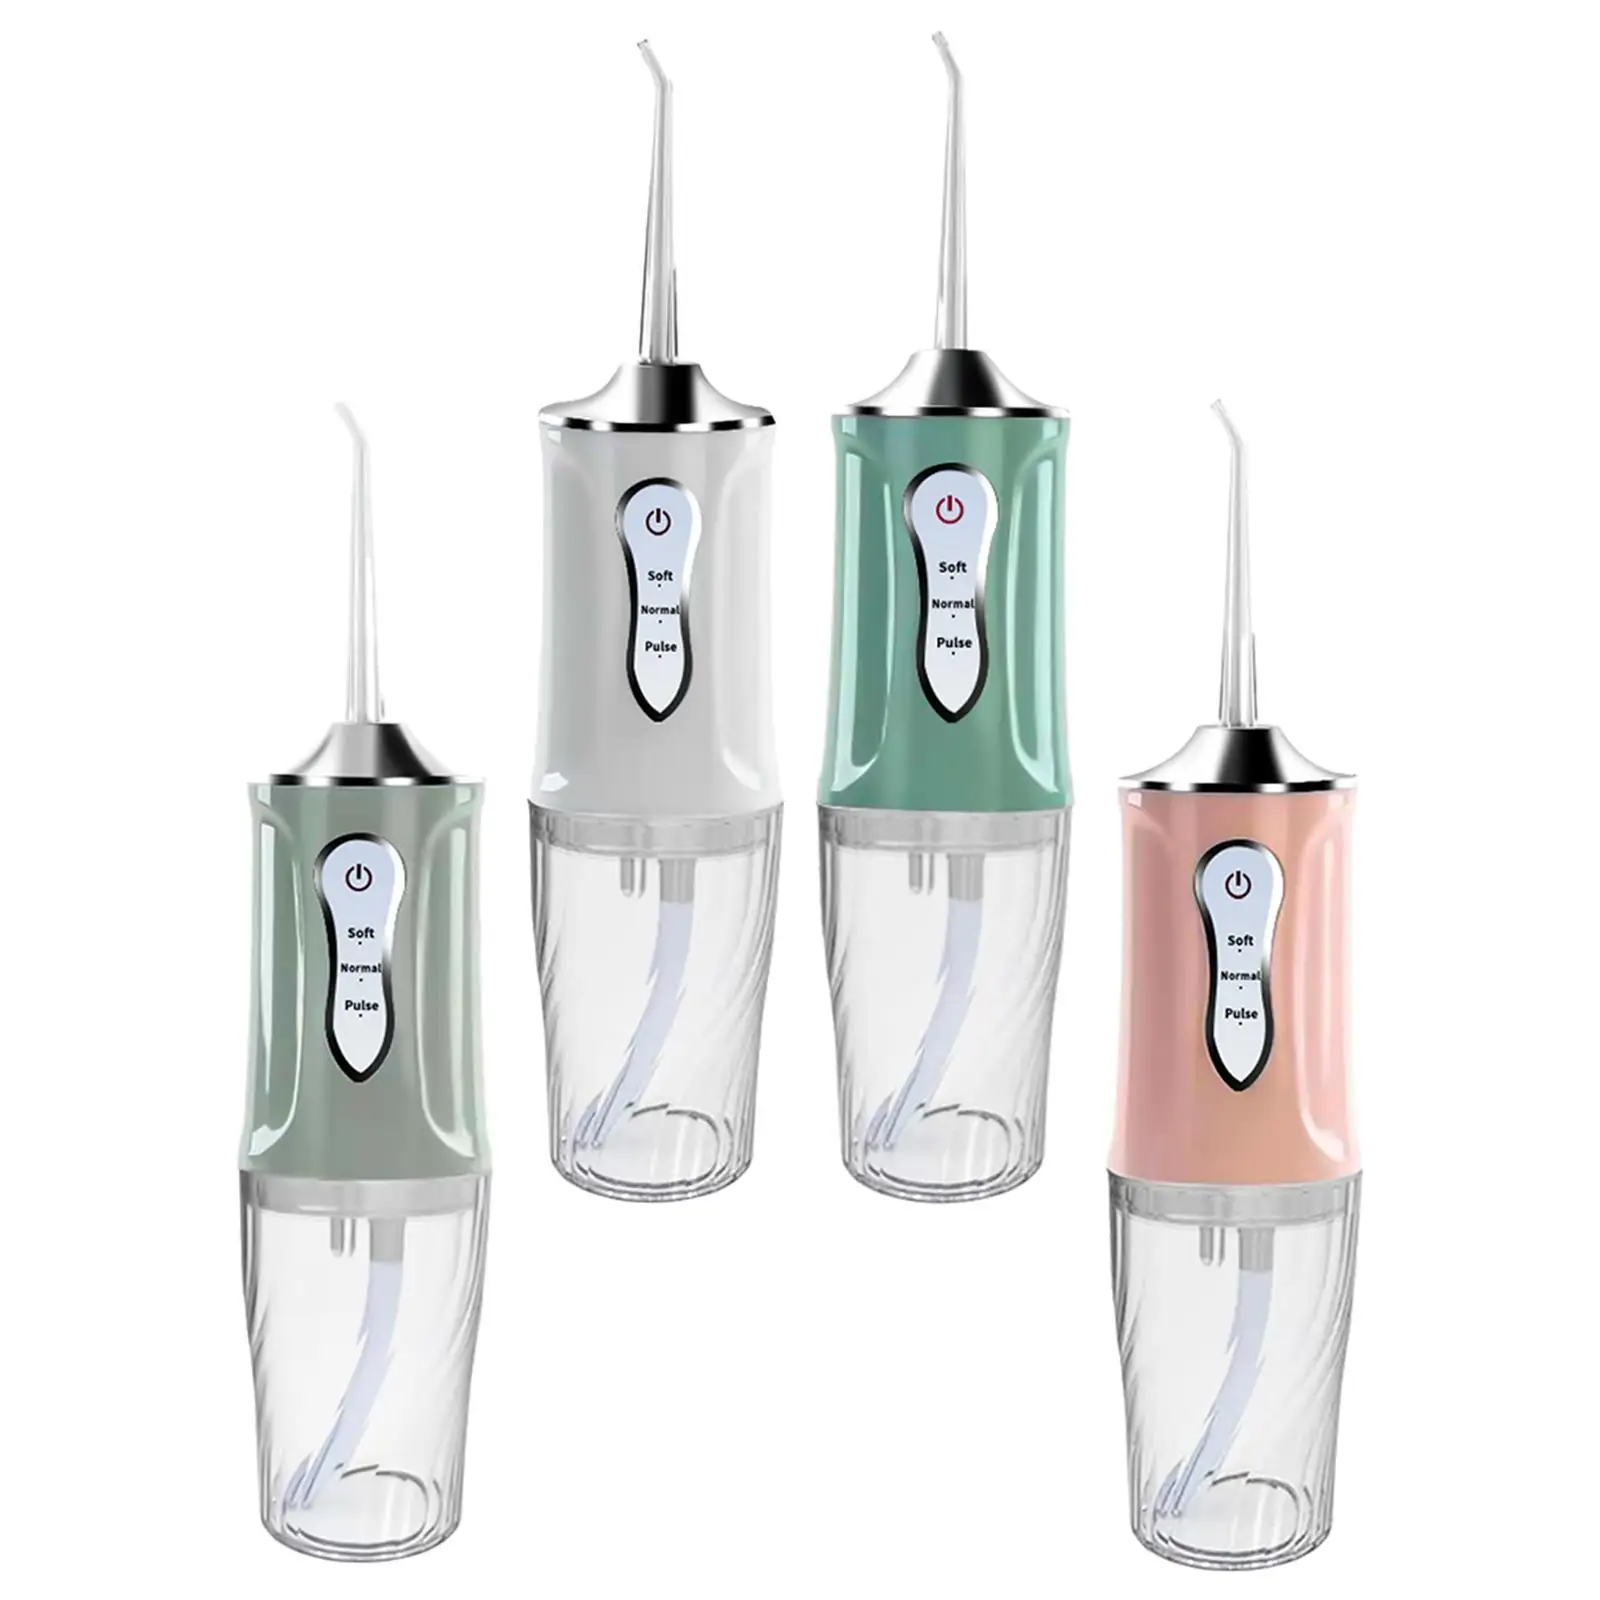 Oral Irrigator Cordless Flossing Nozzles for Care Gums